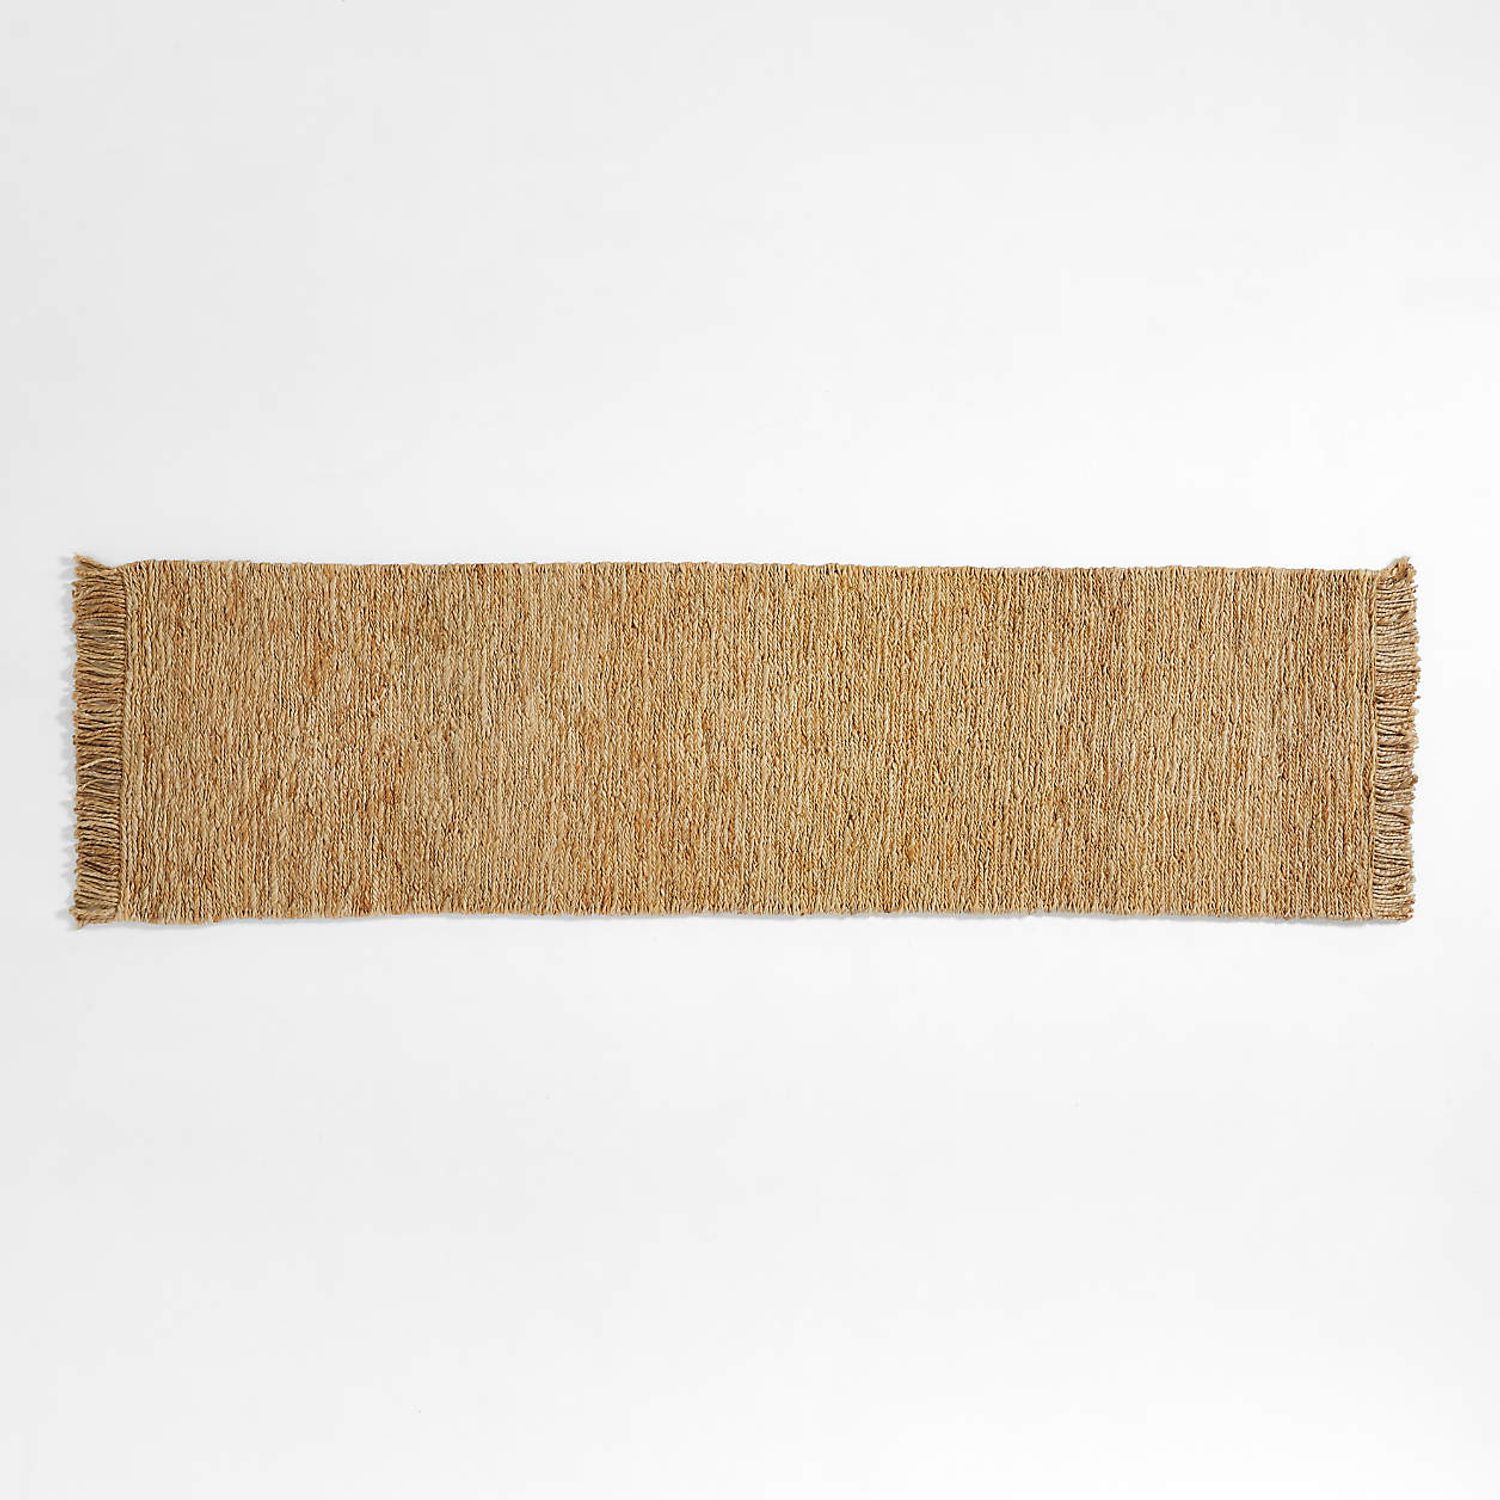 Shop Leanna Ford Yuma Fringed Natural Jute Rug from Crate and Barrel on Openhaus